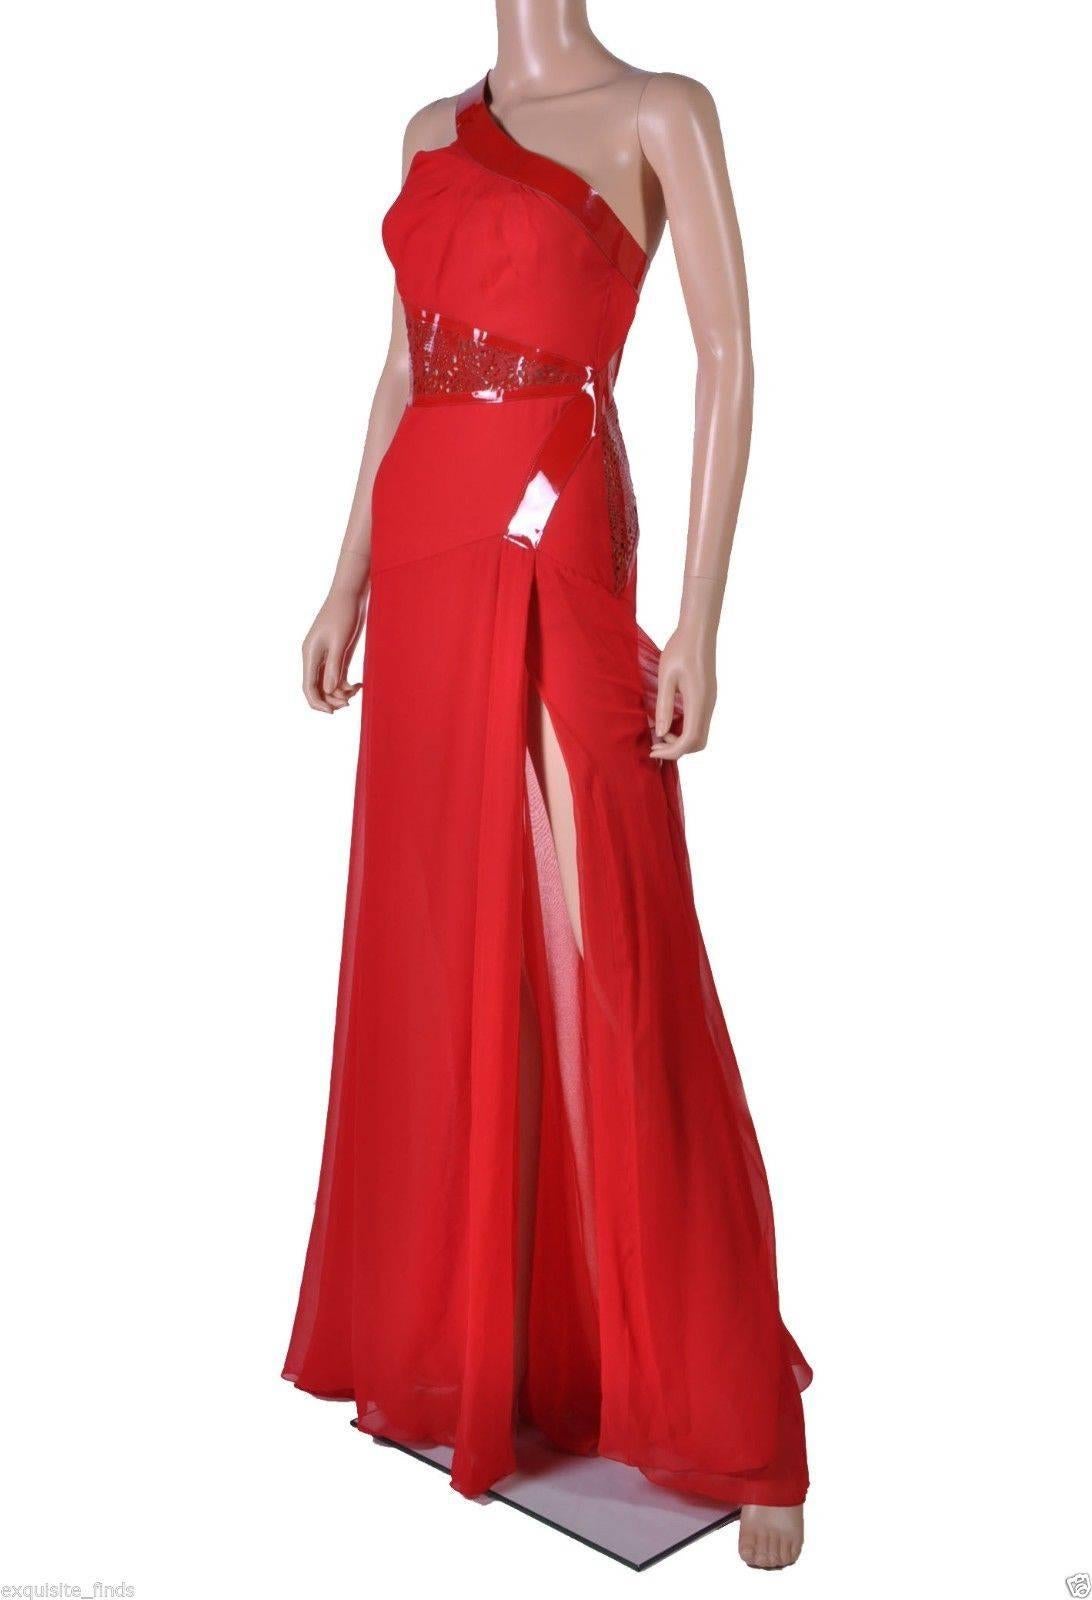  Versace

Red Chiffon Gown with Patent Leather.

One shoulder design

Laser cut detail

Thigh high slit

Made in Italy

IT Size: 38 - US 2

Brand New, with tags
